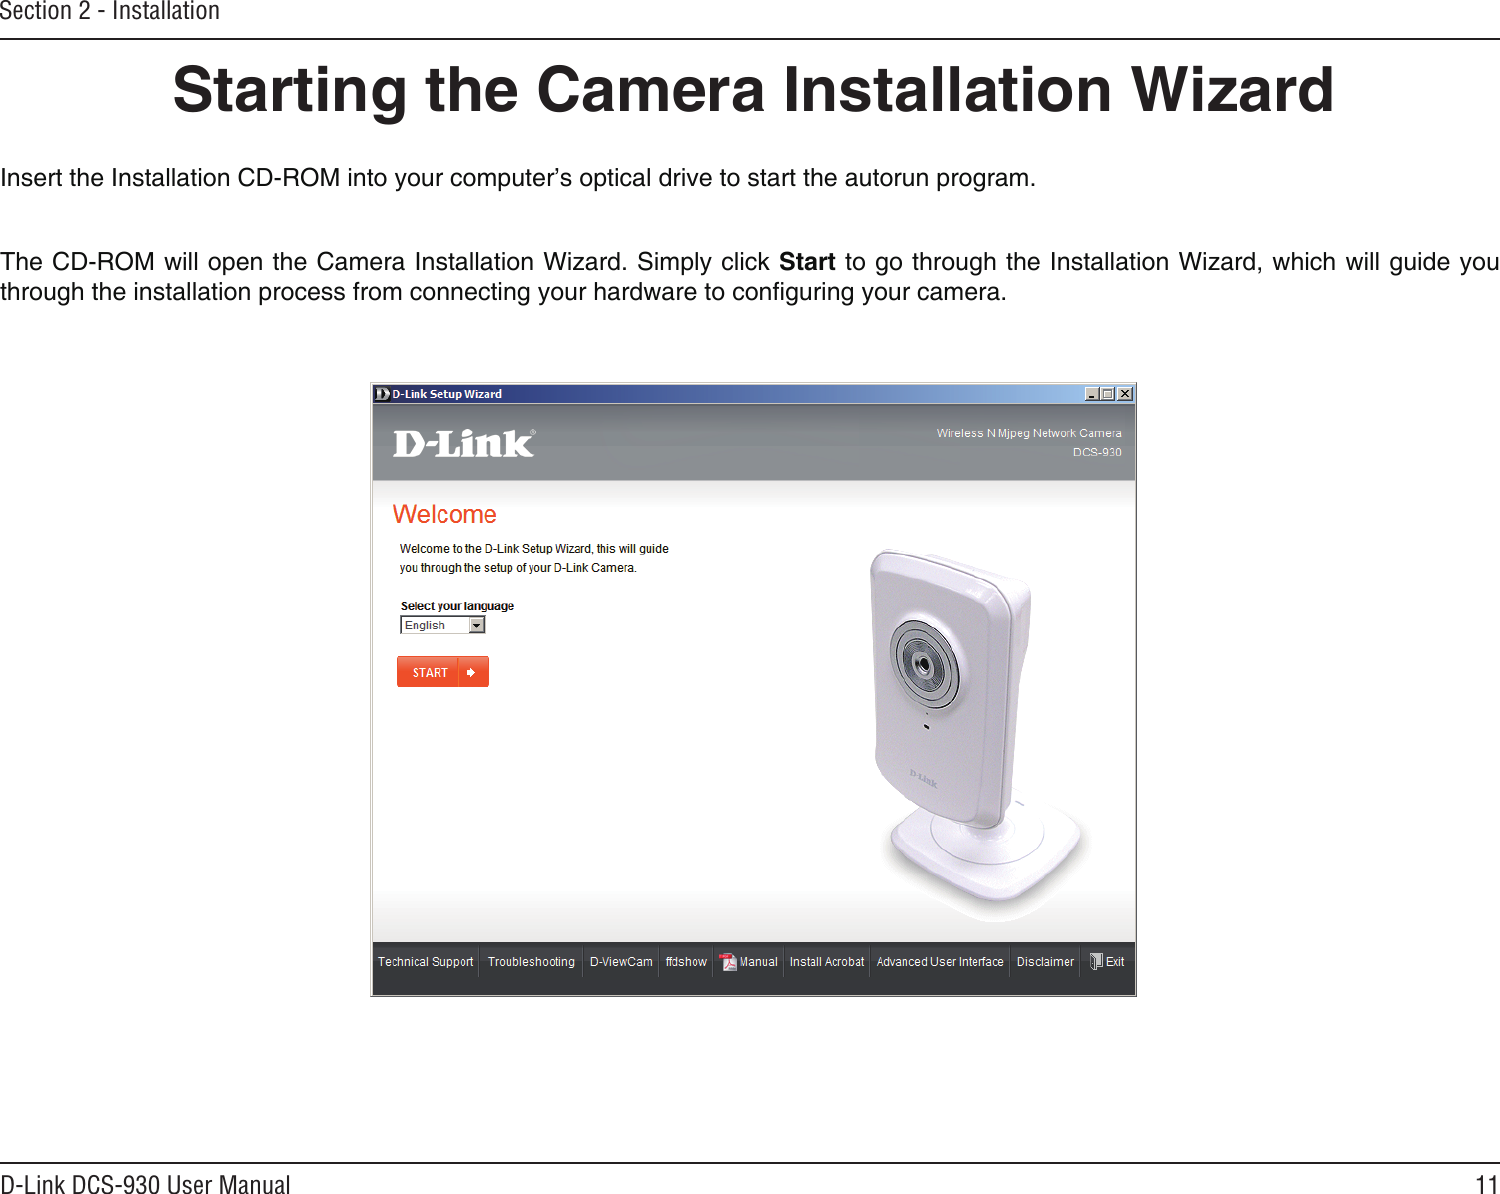 11D-Link DCS-930 User ManualSection 2 - InstallationInsert the Installation CD-ROM into your computer’s optical drive to start the autorun program. The CD-ROM will open the Camera Installation Wizard. Simply click Start to go through the Installation Wizard, which will guide you through the installation process from connecting your hardware to conguring your camera.Starting the Camera Installation Wizard